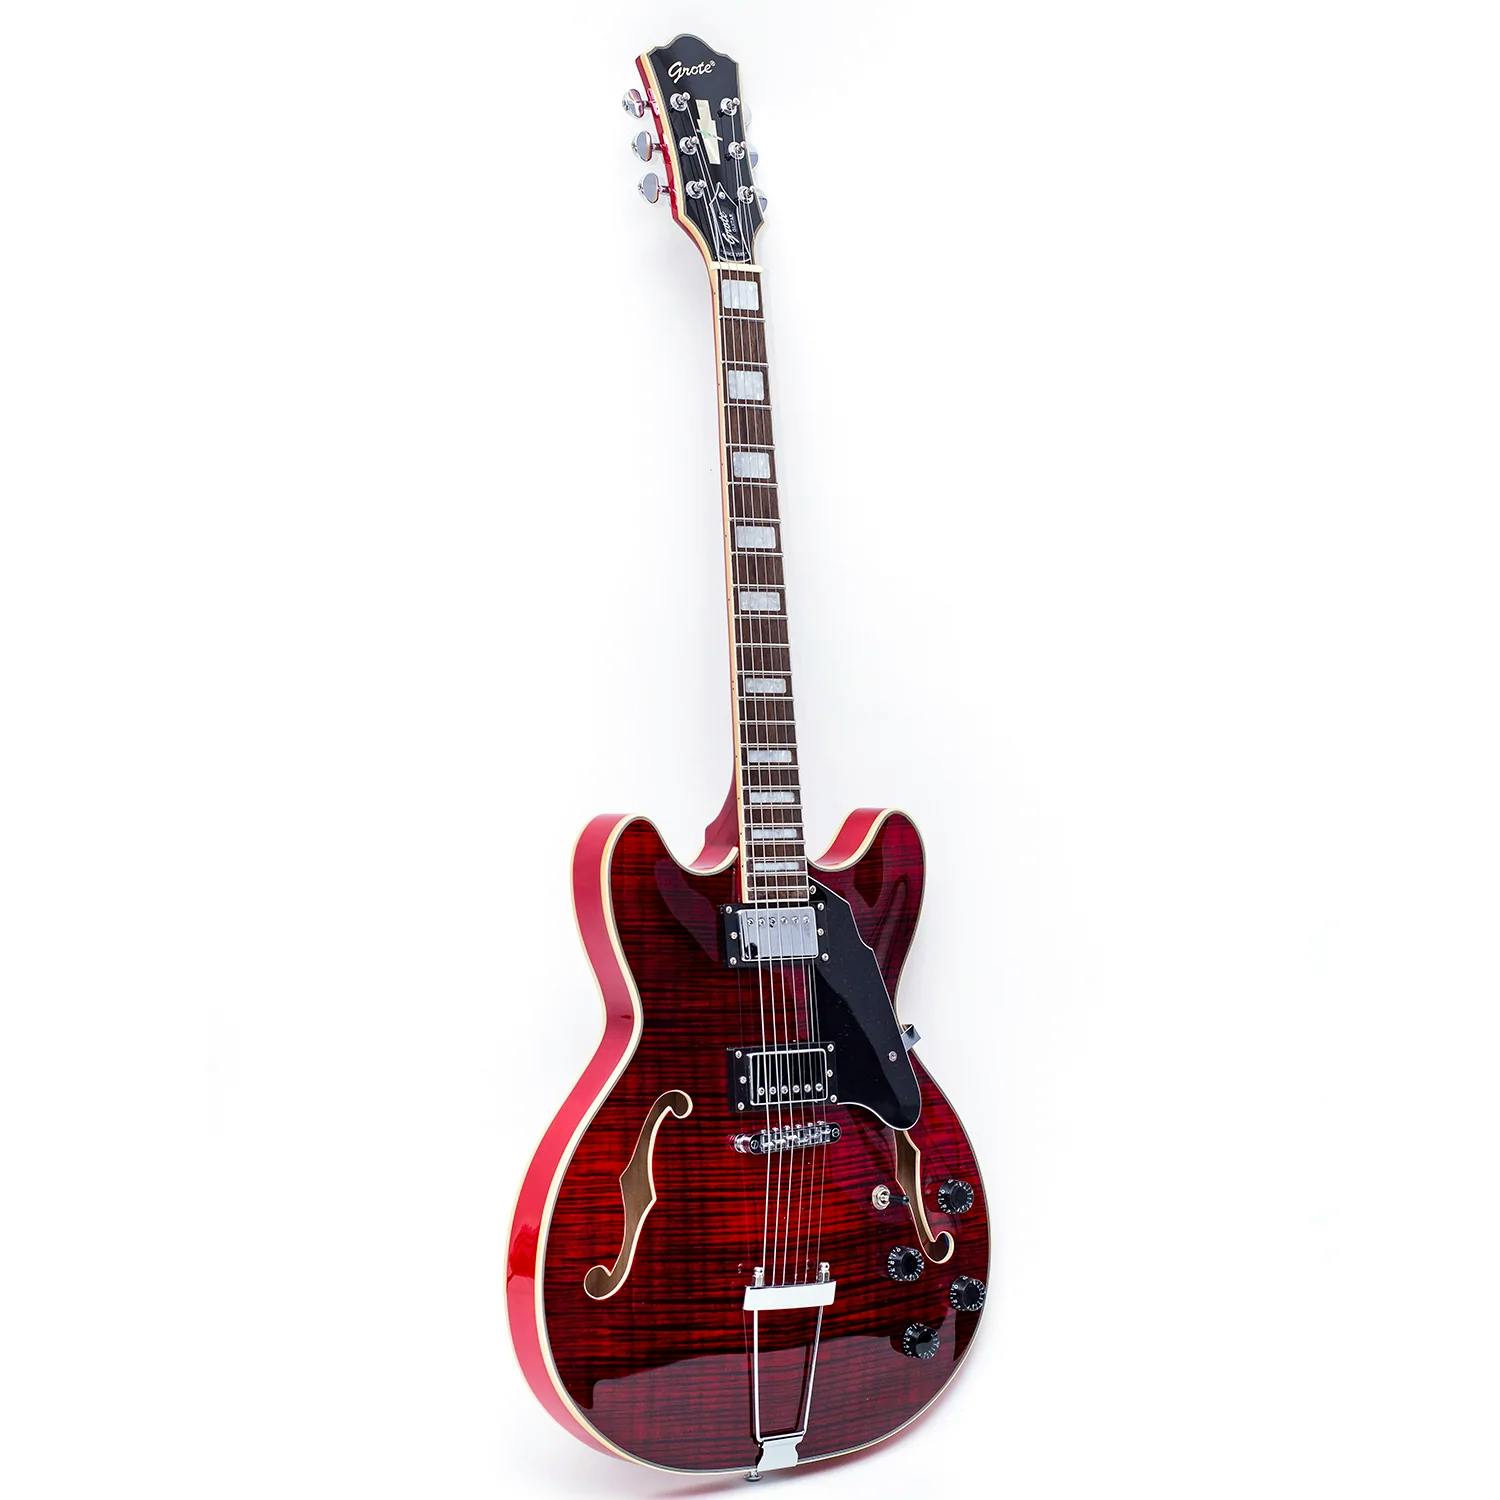 Grote G35 Semi Hollow Electric Guitar In Trans Red With Flamed Maple Top Andertons Music Co